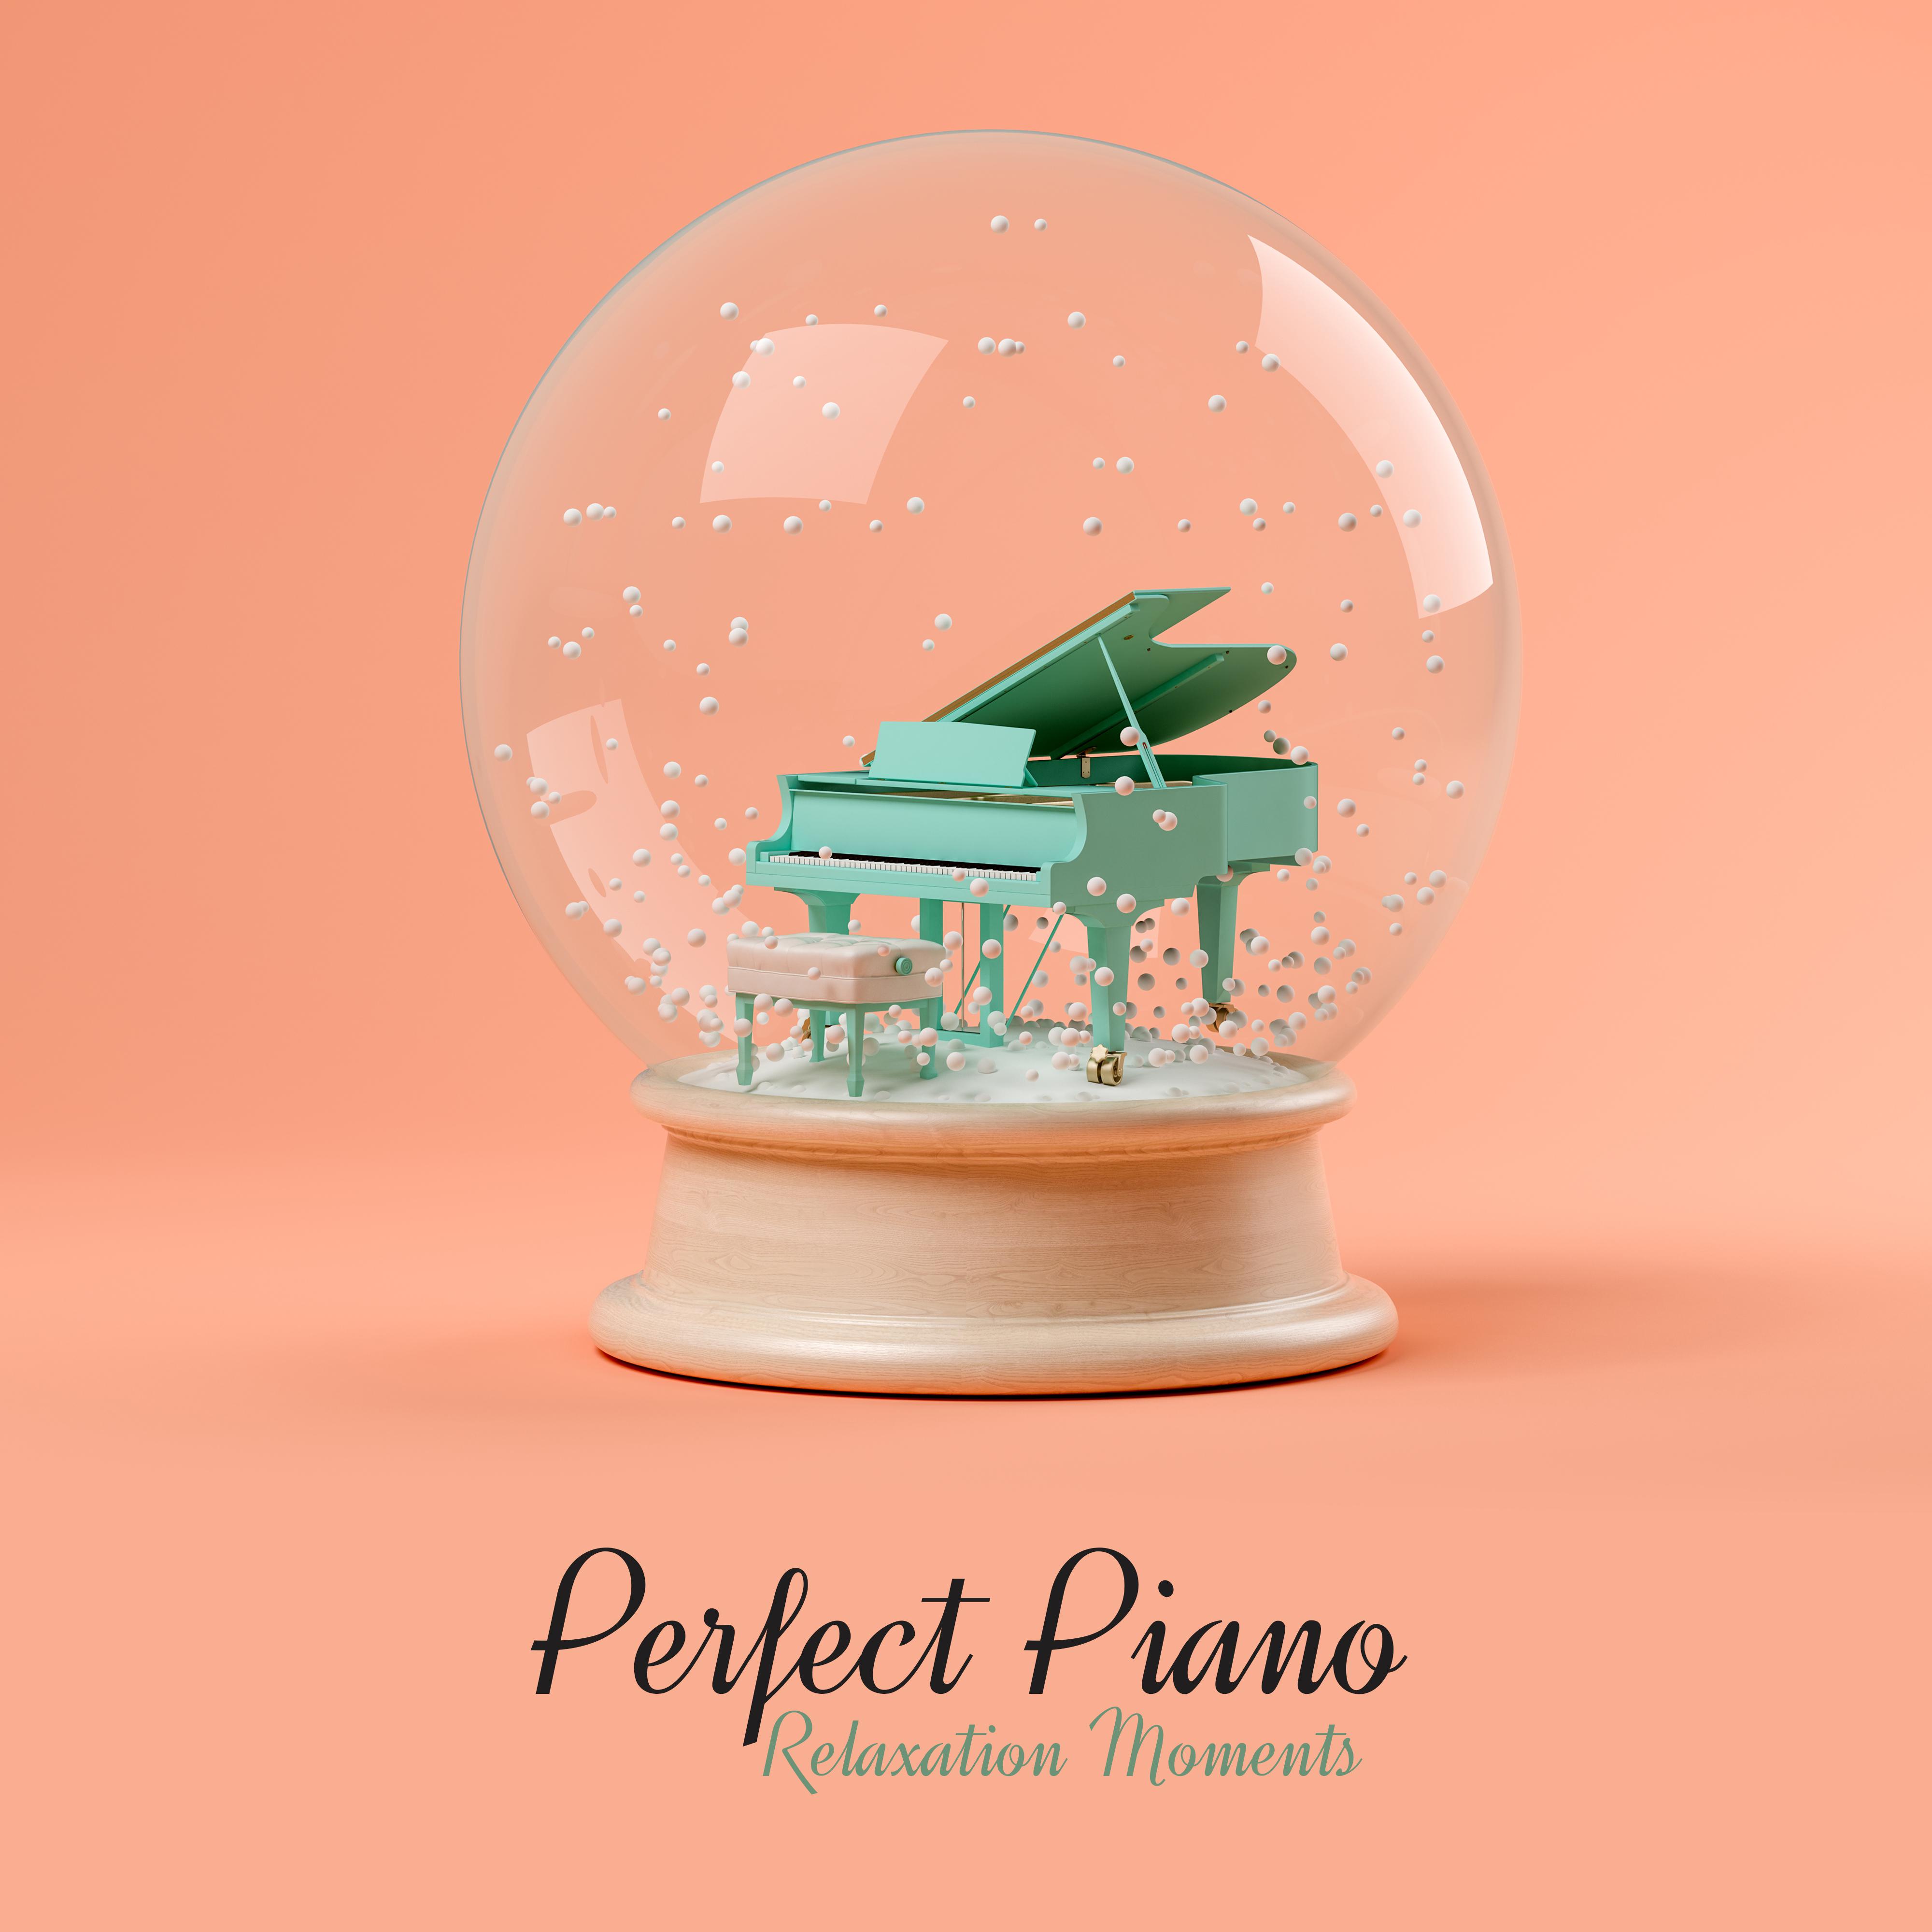 Perfect Piano Relaxation Moments: Collection of Best 2019 Instrumental Piano Jazz Music, Soothing Melodies for Pure Relax After Long Week, Calming Down, Stress Relief, Full Night Rest